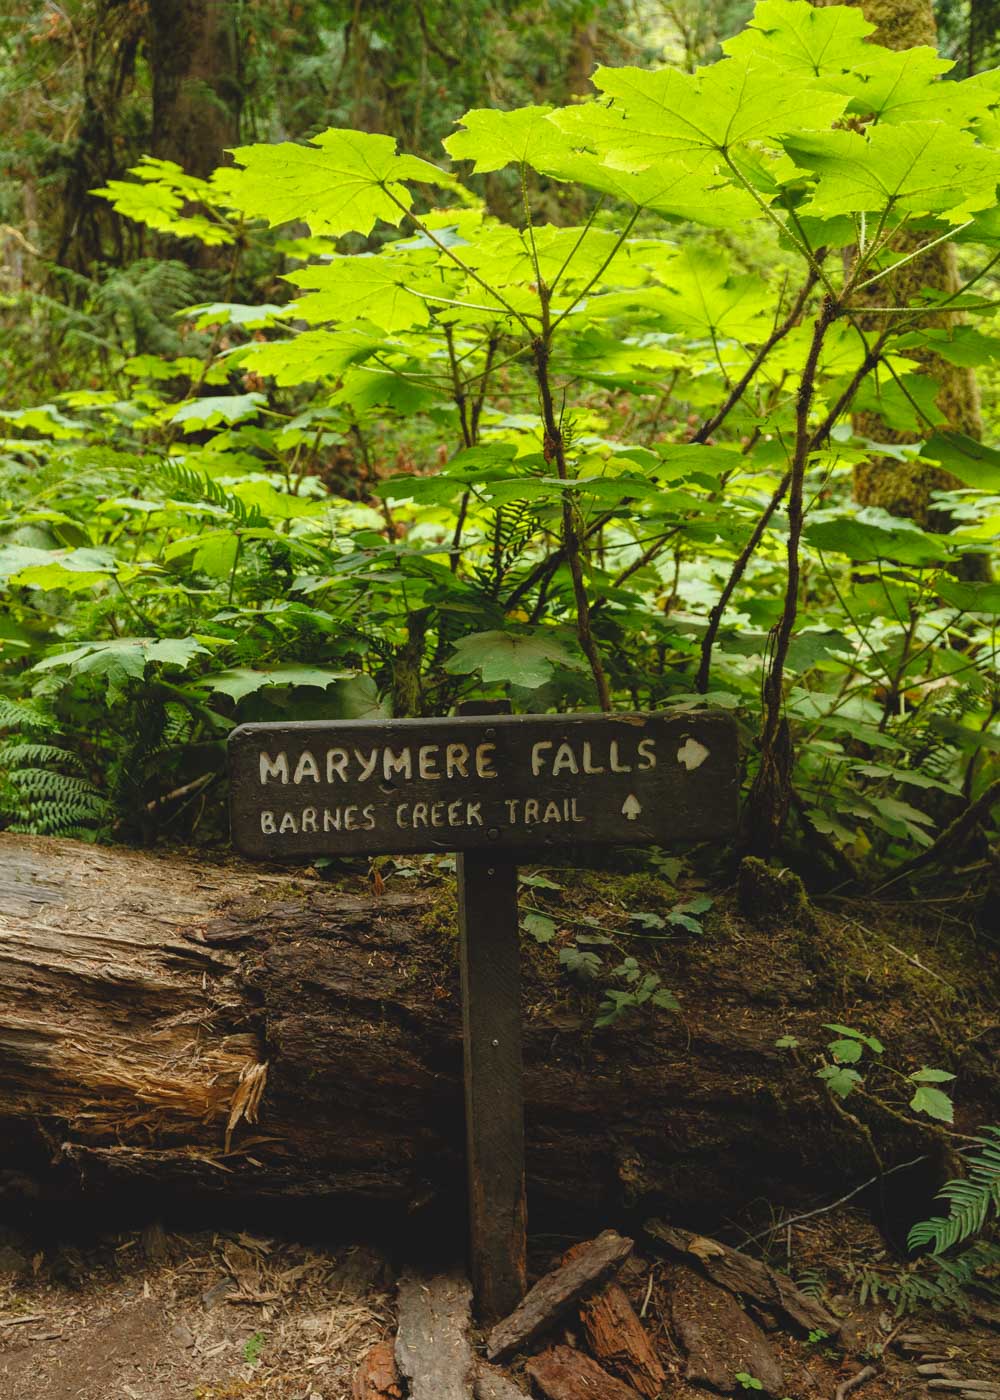 Marymere falls trail sign surrounded by lush green plants and a big downed log. 